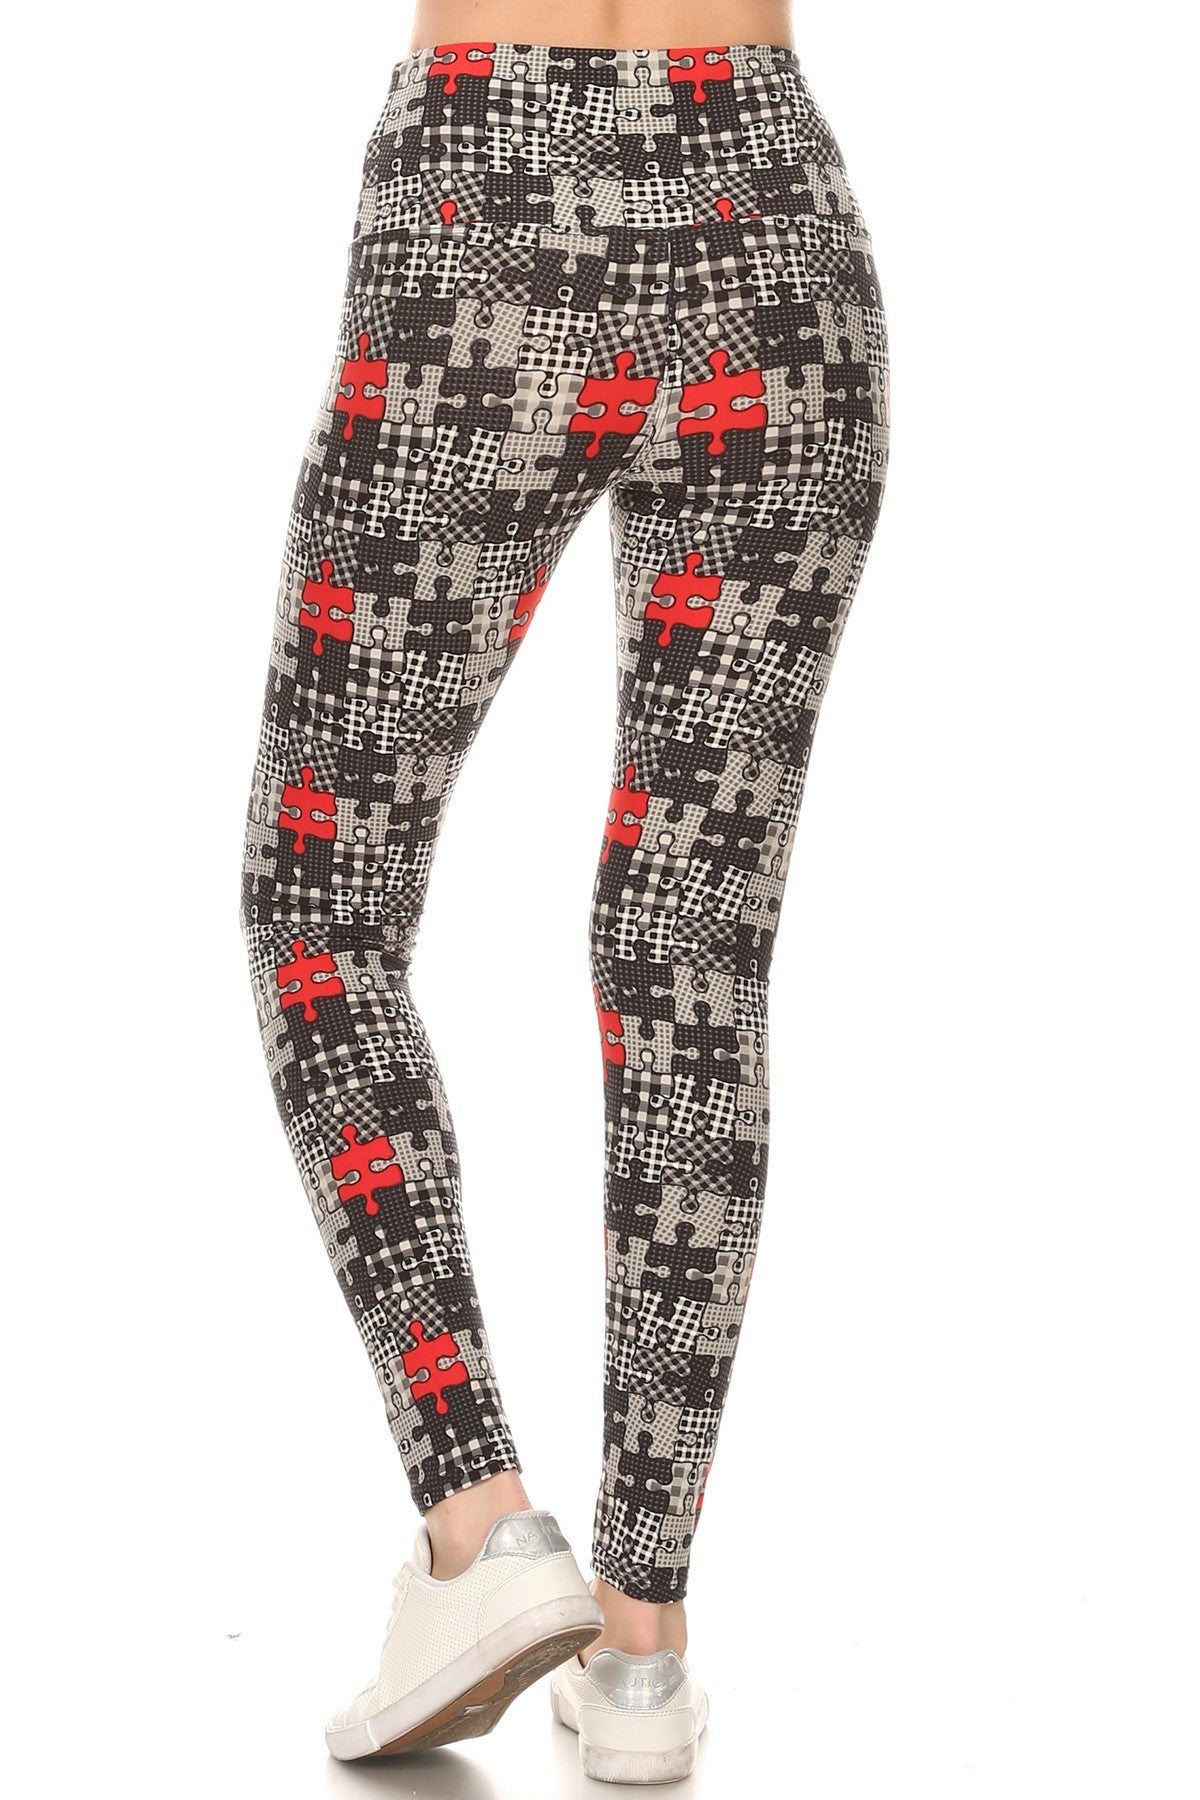 Os 5-inch Long Yoga Style Banded Lined Puzzle Printed Knit Legging With High Waist